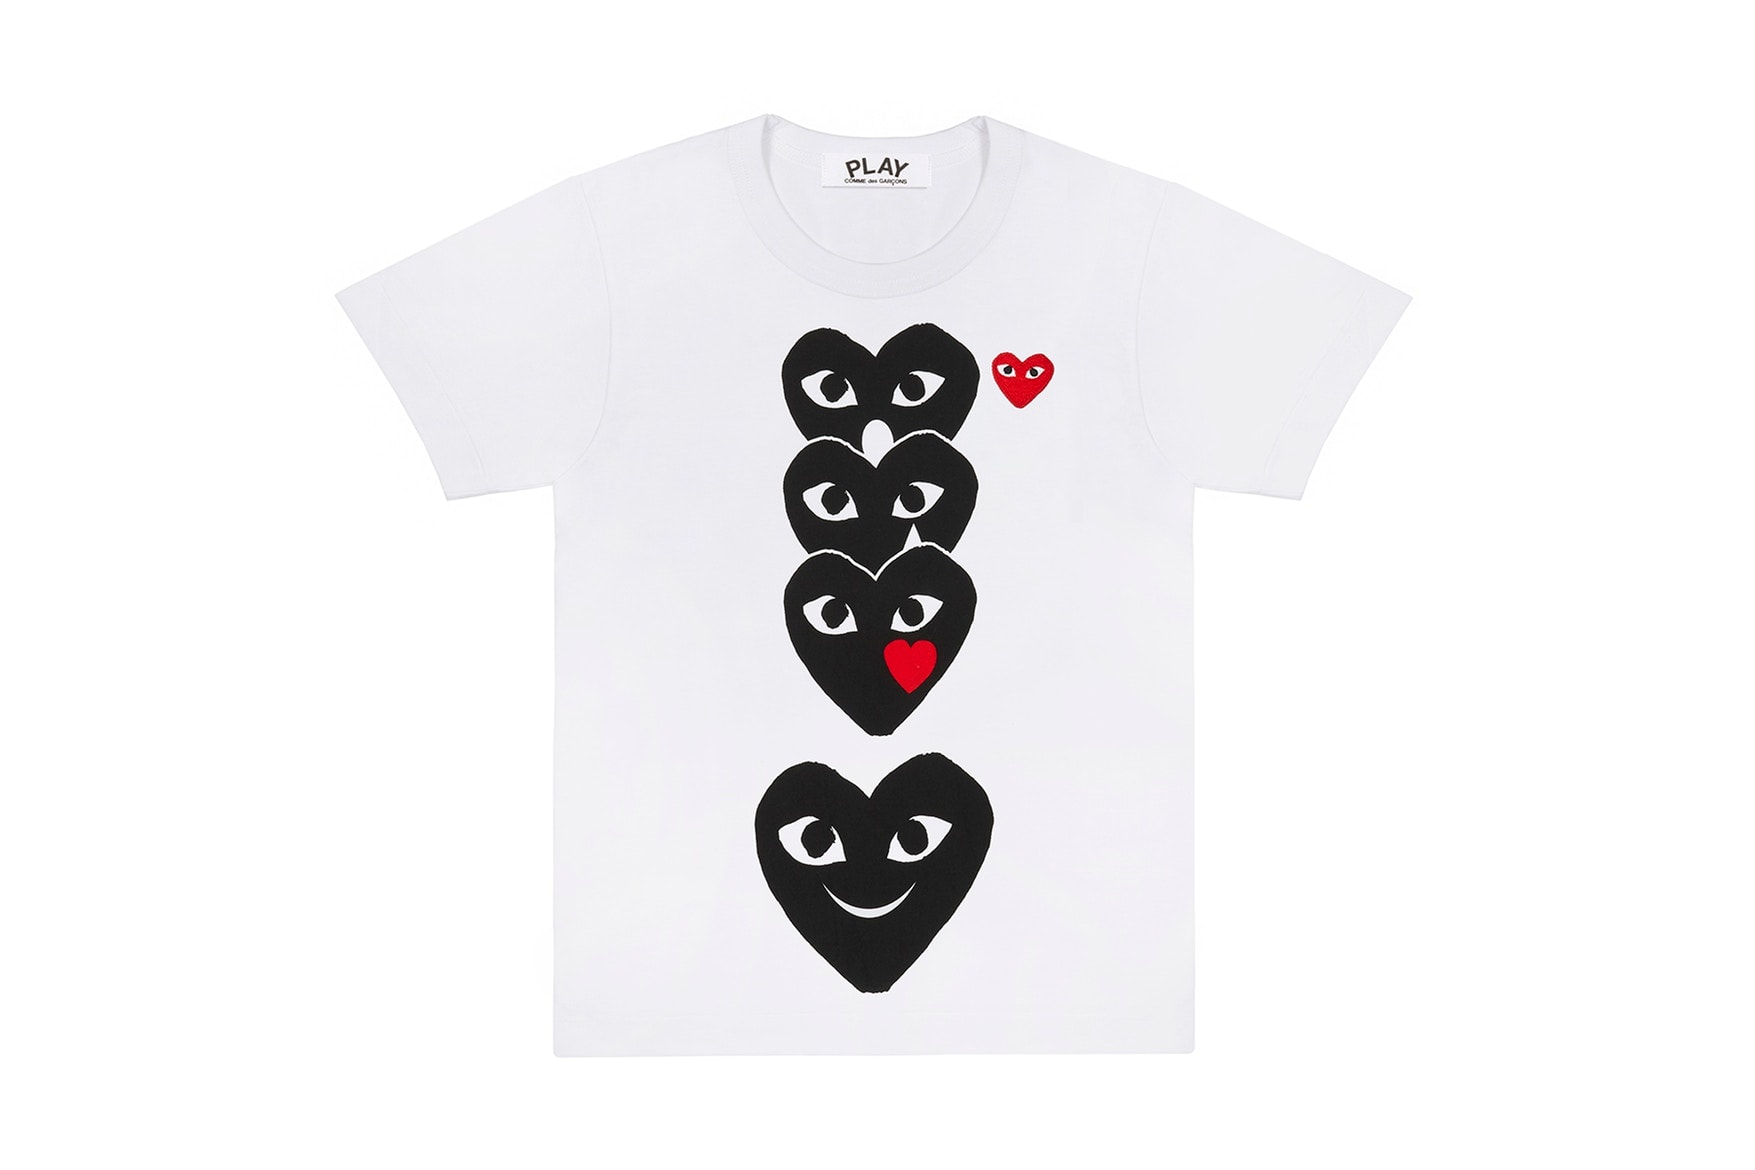 COMME des GARÇONS PLAY Emoji Play T-Shirt Hearth With Eyes Red Black White